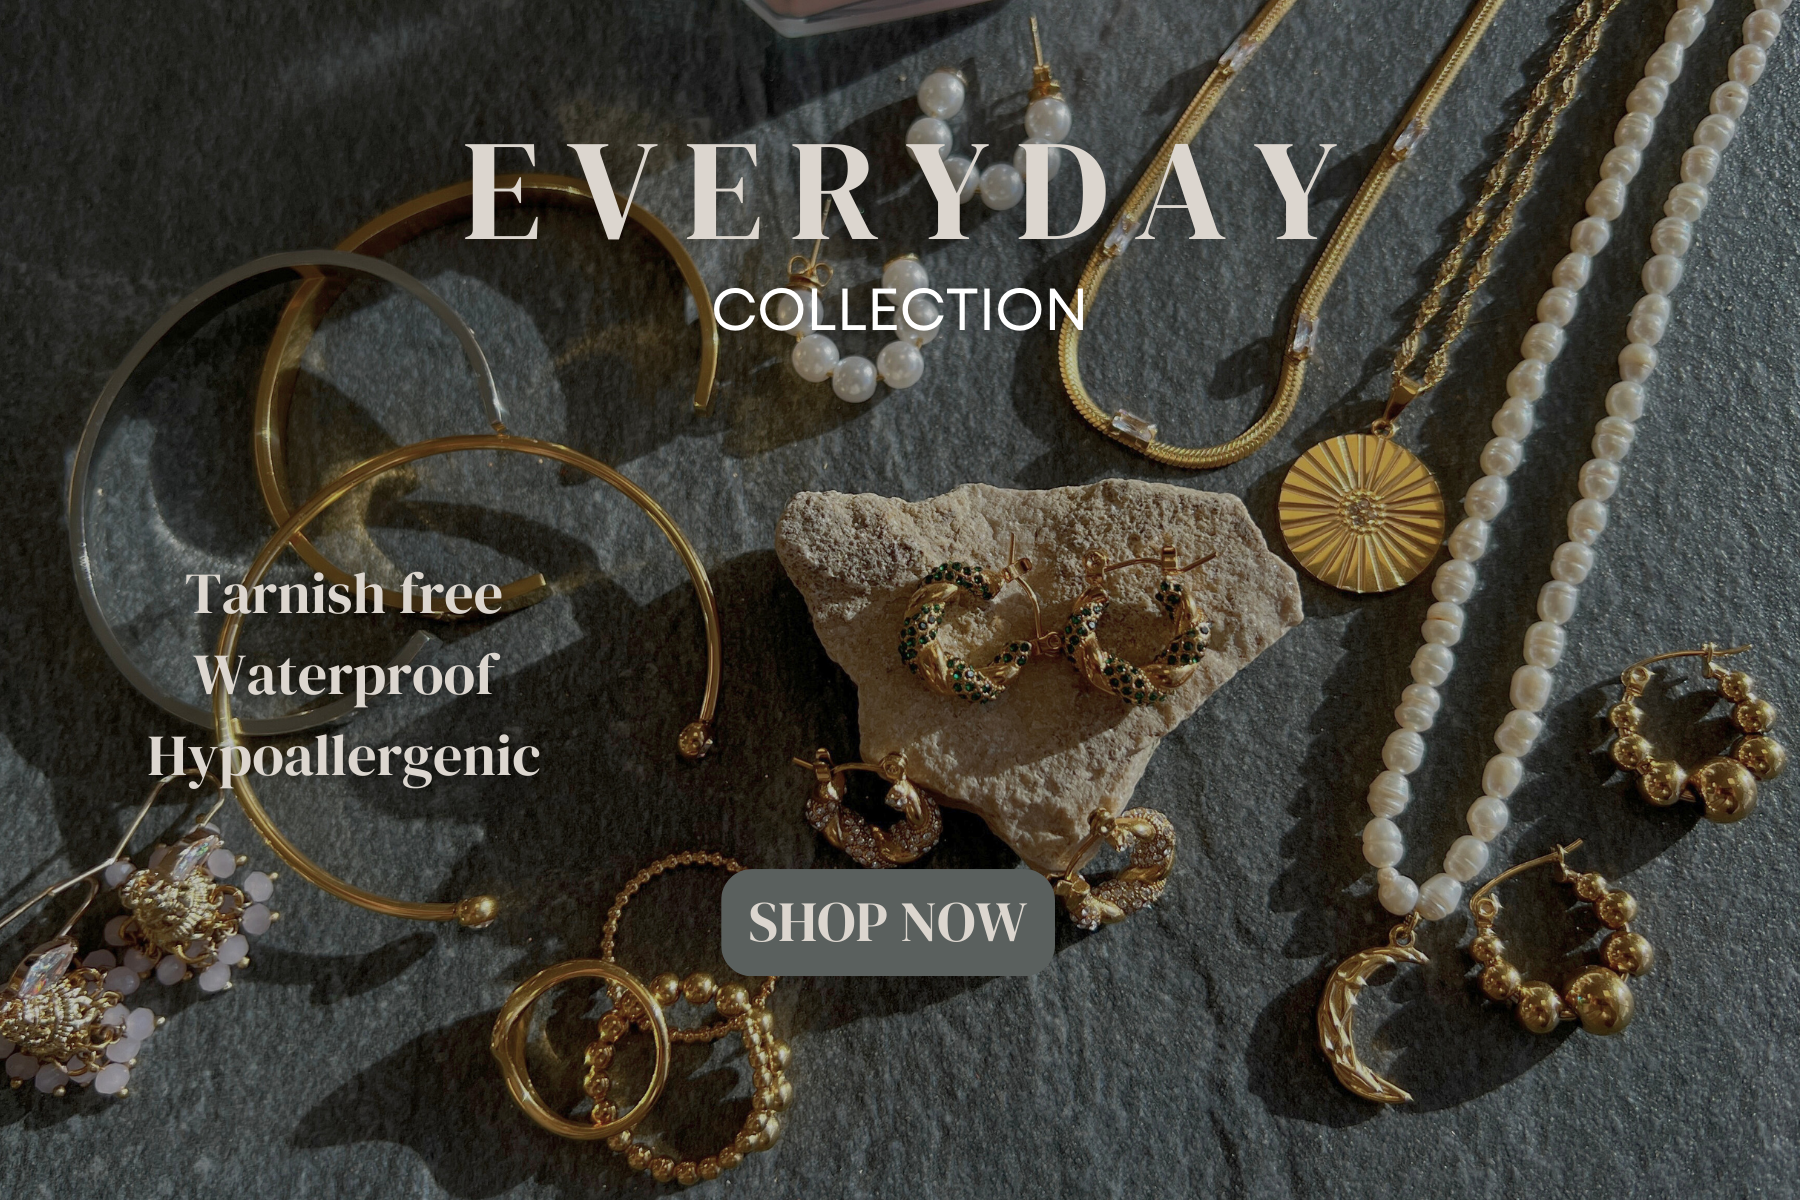 All Fashion Jewellery Collection for Women